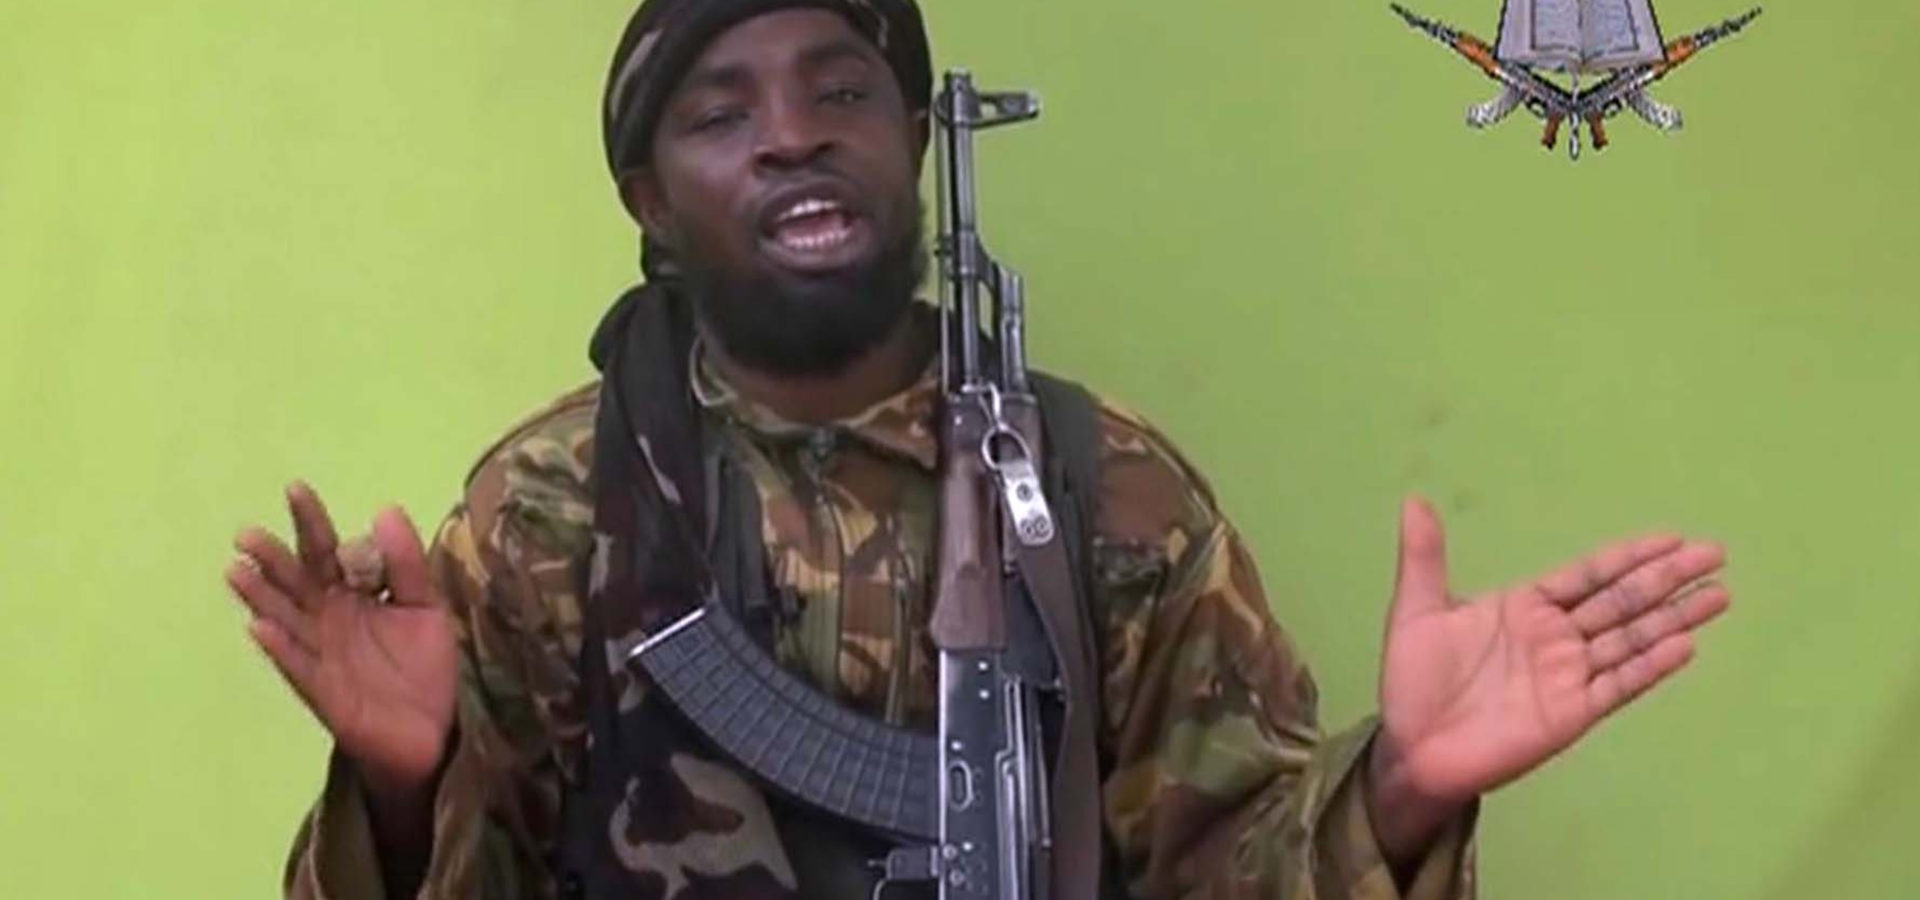 Nigeria's Boko Haram leader Abubakar Shekau speaking to the camera. Shekau has allegedly made a formal allegiance to ISIS on, March 7, 2015, in an audio message posted on Twitter. (AP Photo)